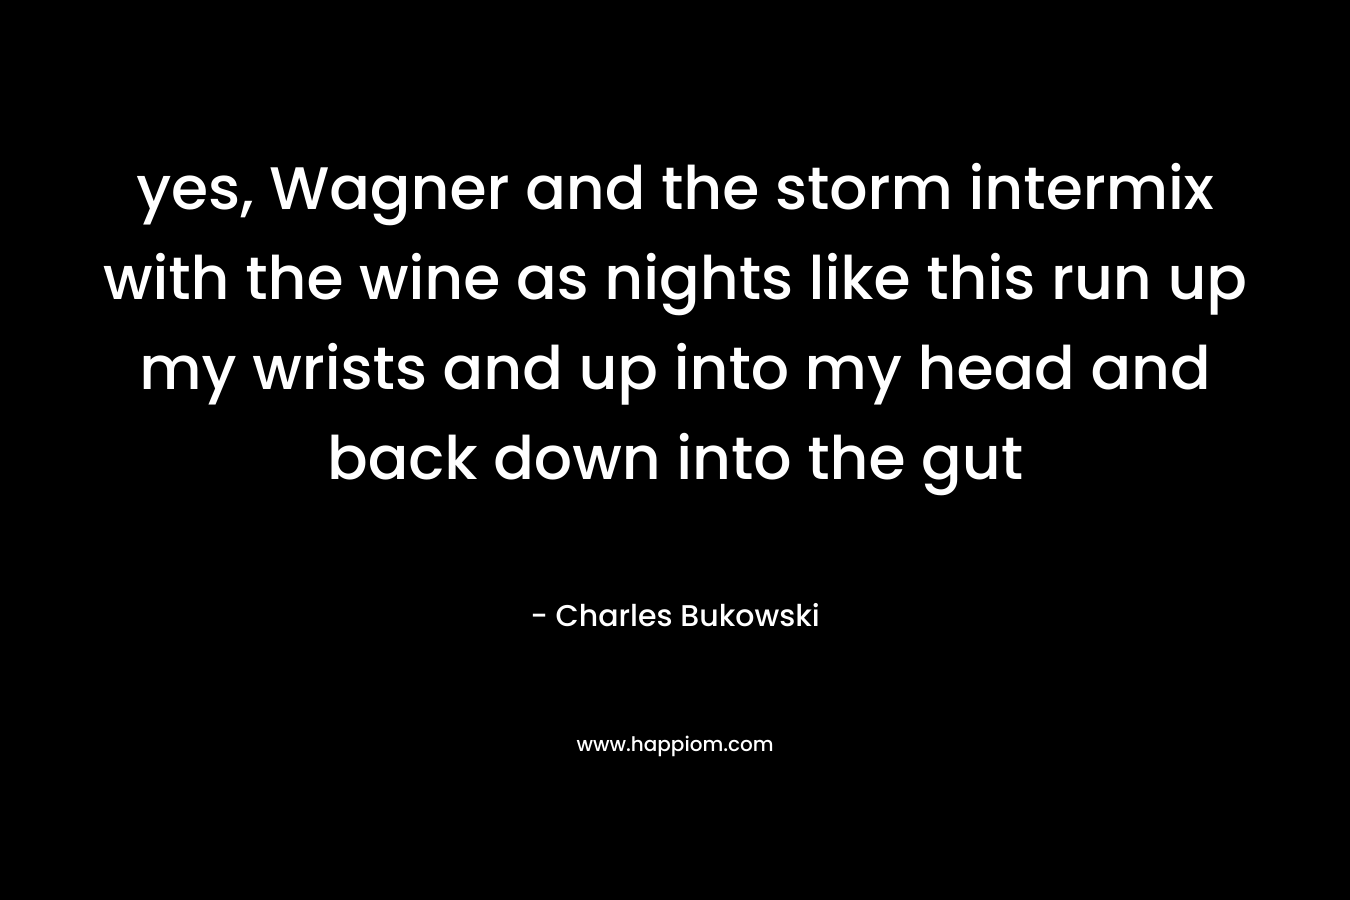 yes, Wagner and the storm intermix with the wine as nights like this run up my wrists and up into my head and back down into the gut – Charles Bukowski